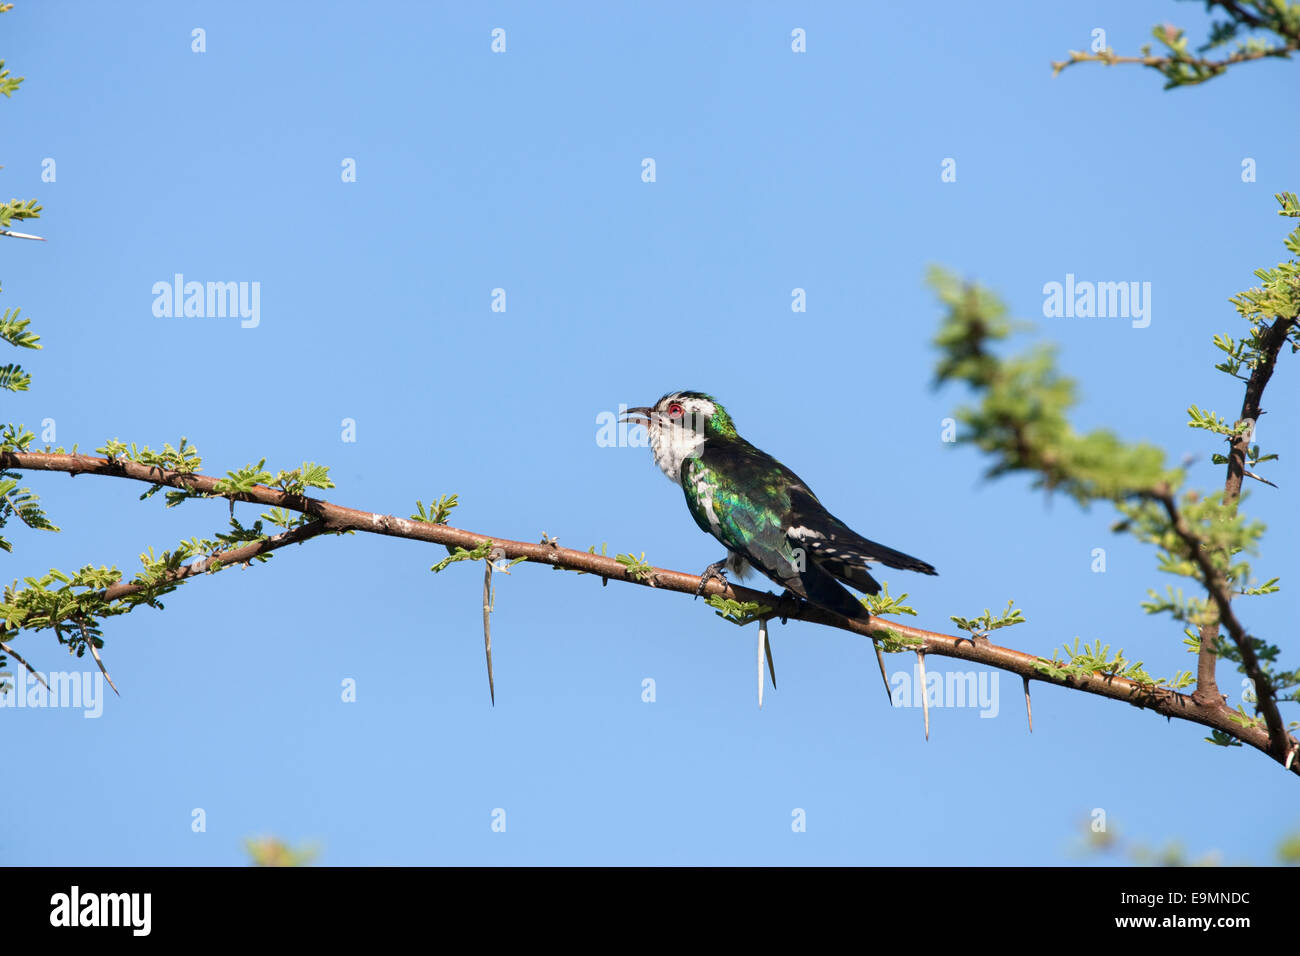 Diderick cuculo, Chrysococcyx caprius, Kruger National Park, Sud Africa Foto Stock